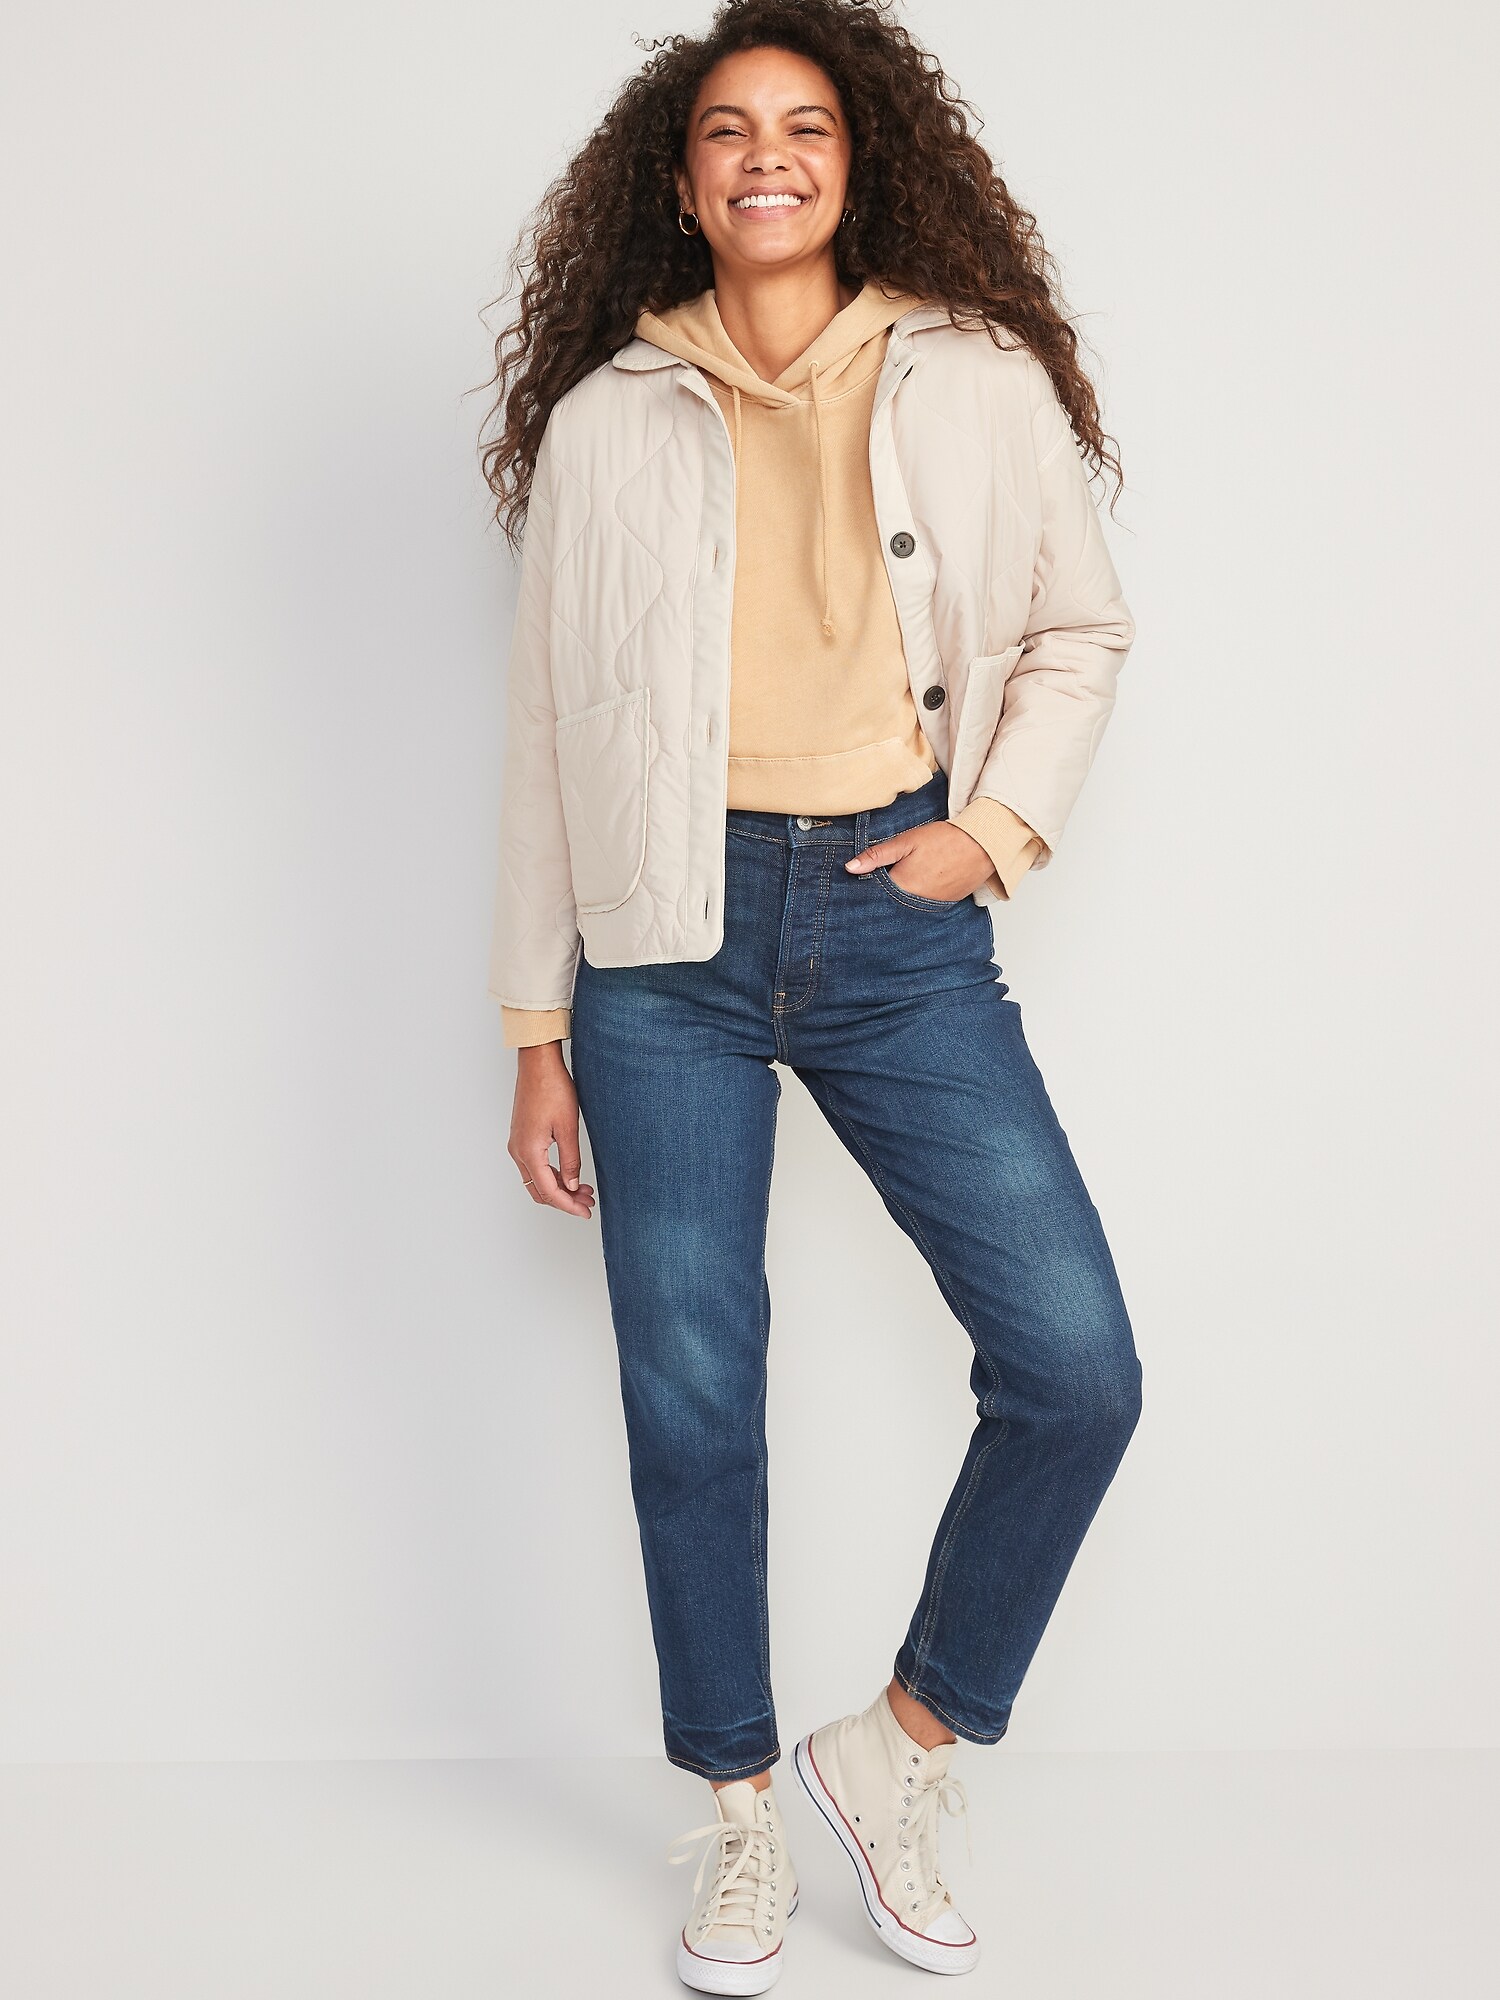 Curvy Extra High-Waisted Button-Fly Sky-Hi Straight Jeans for